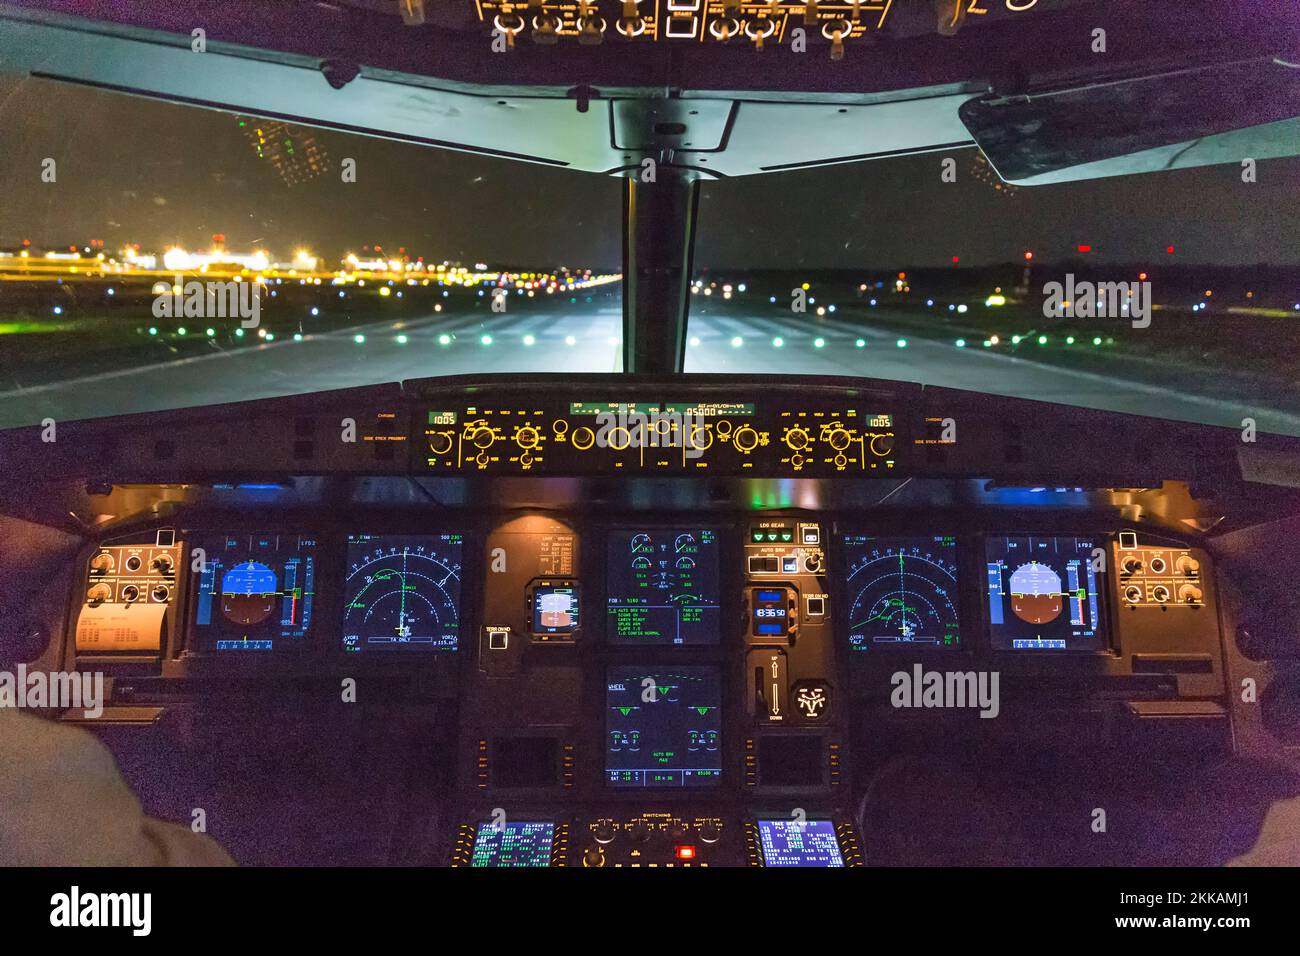 Frankfurt, Germany - October 9, 2014: landing by night with a commercaial aircraft A320 at the airport of Frankfurt, Germany. Stock Photo